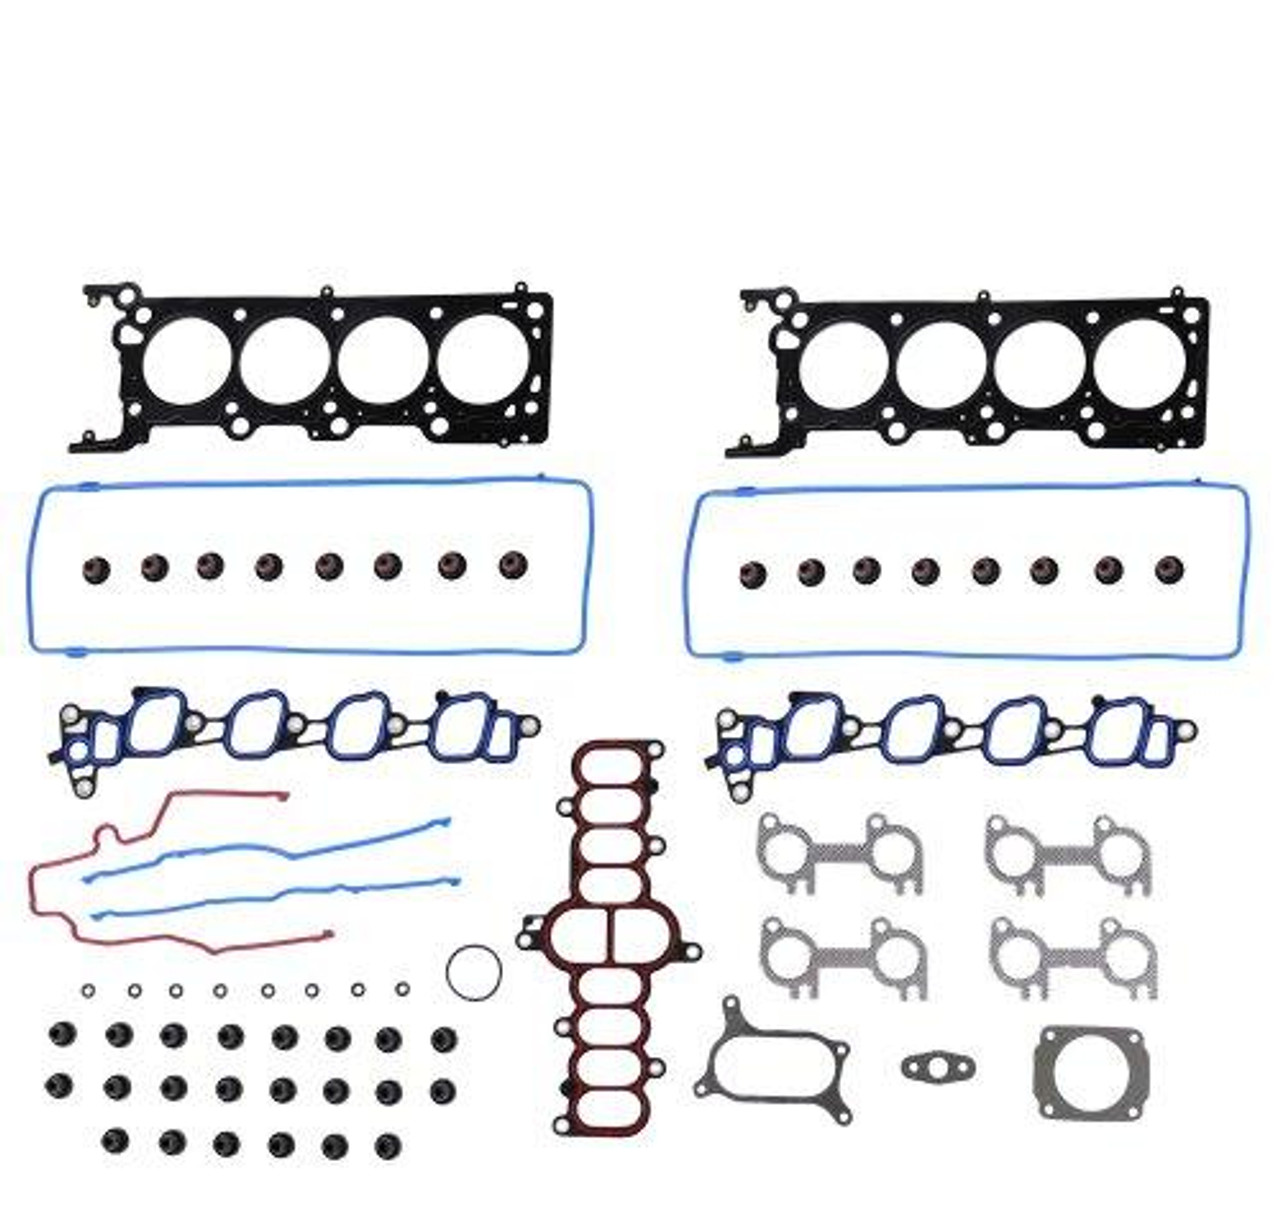 Head Gasket Set - 2001 Ford Expedition 4.6L Engine Parts # HGS4169ZE3